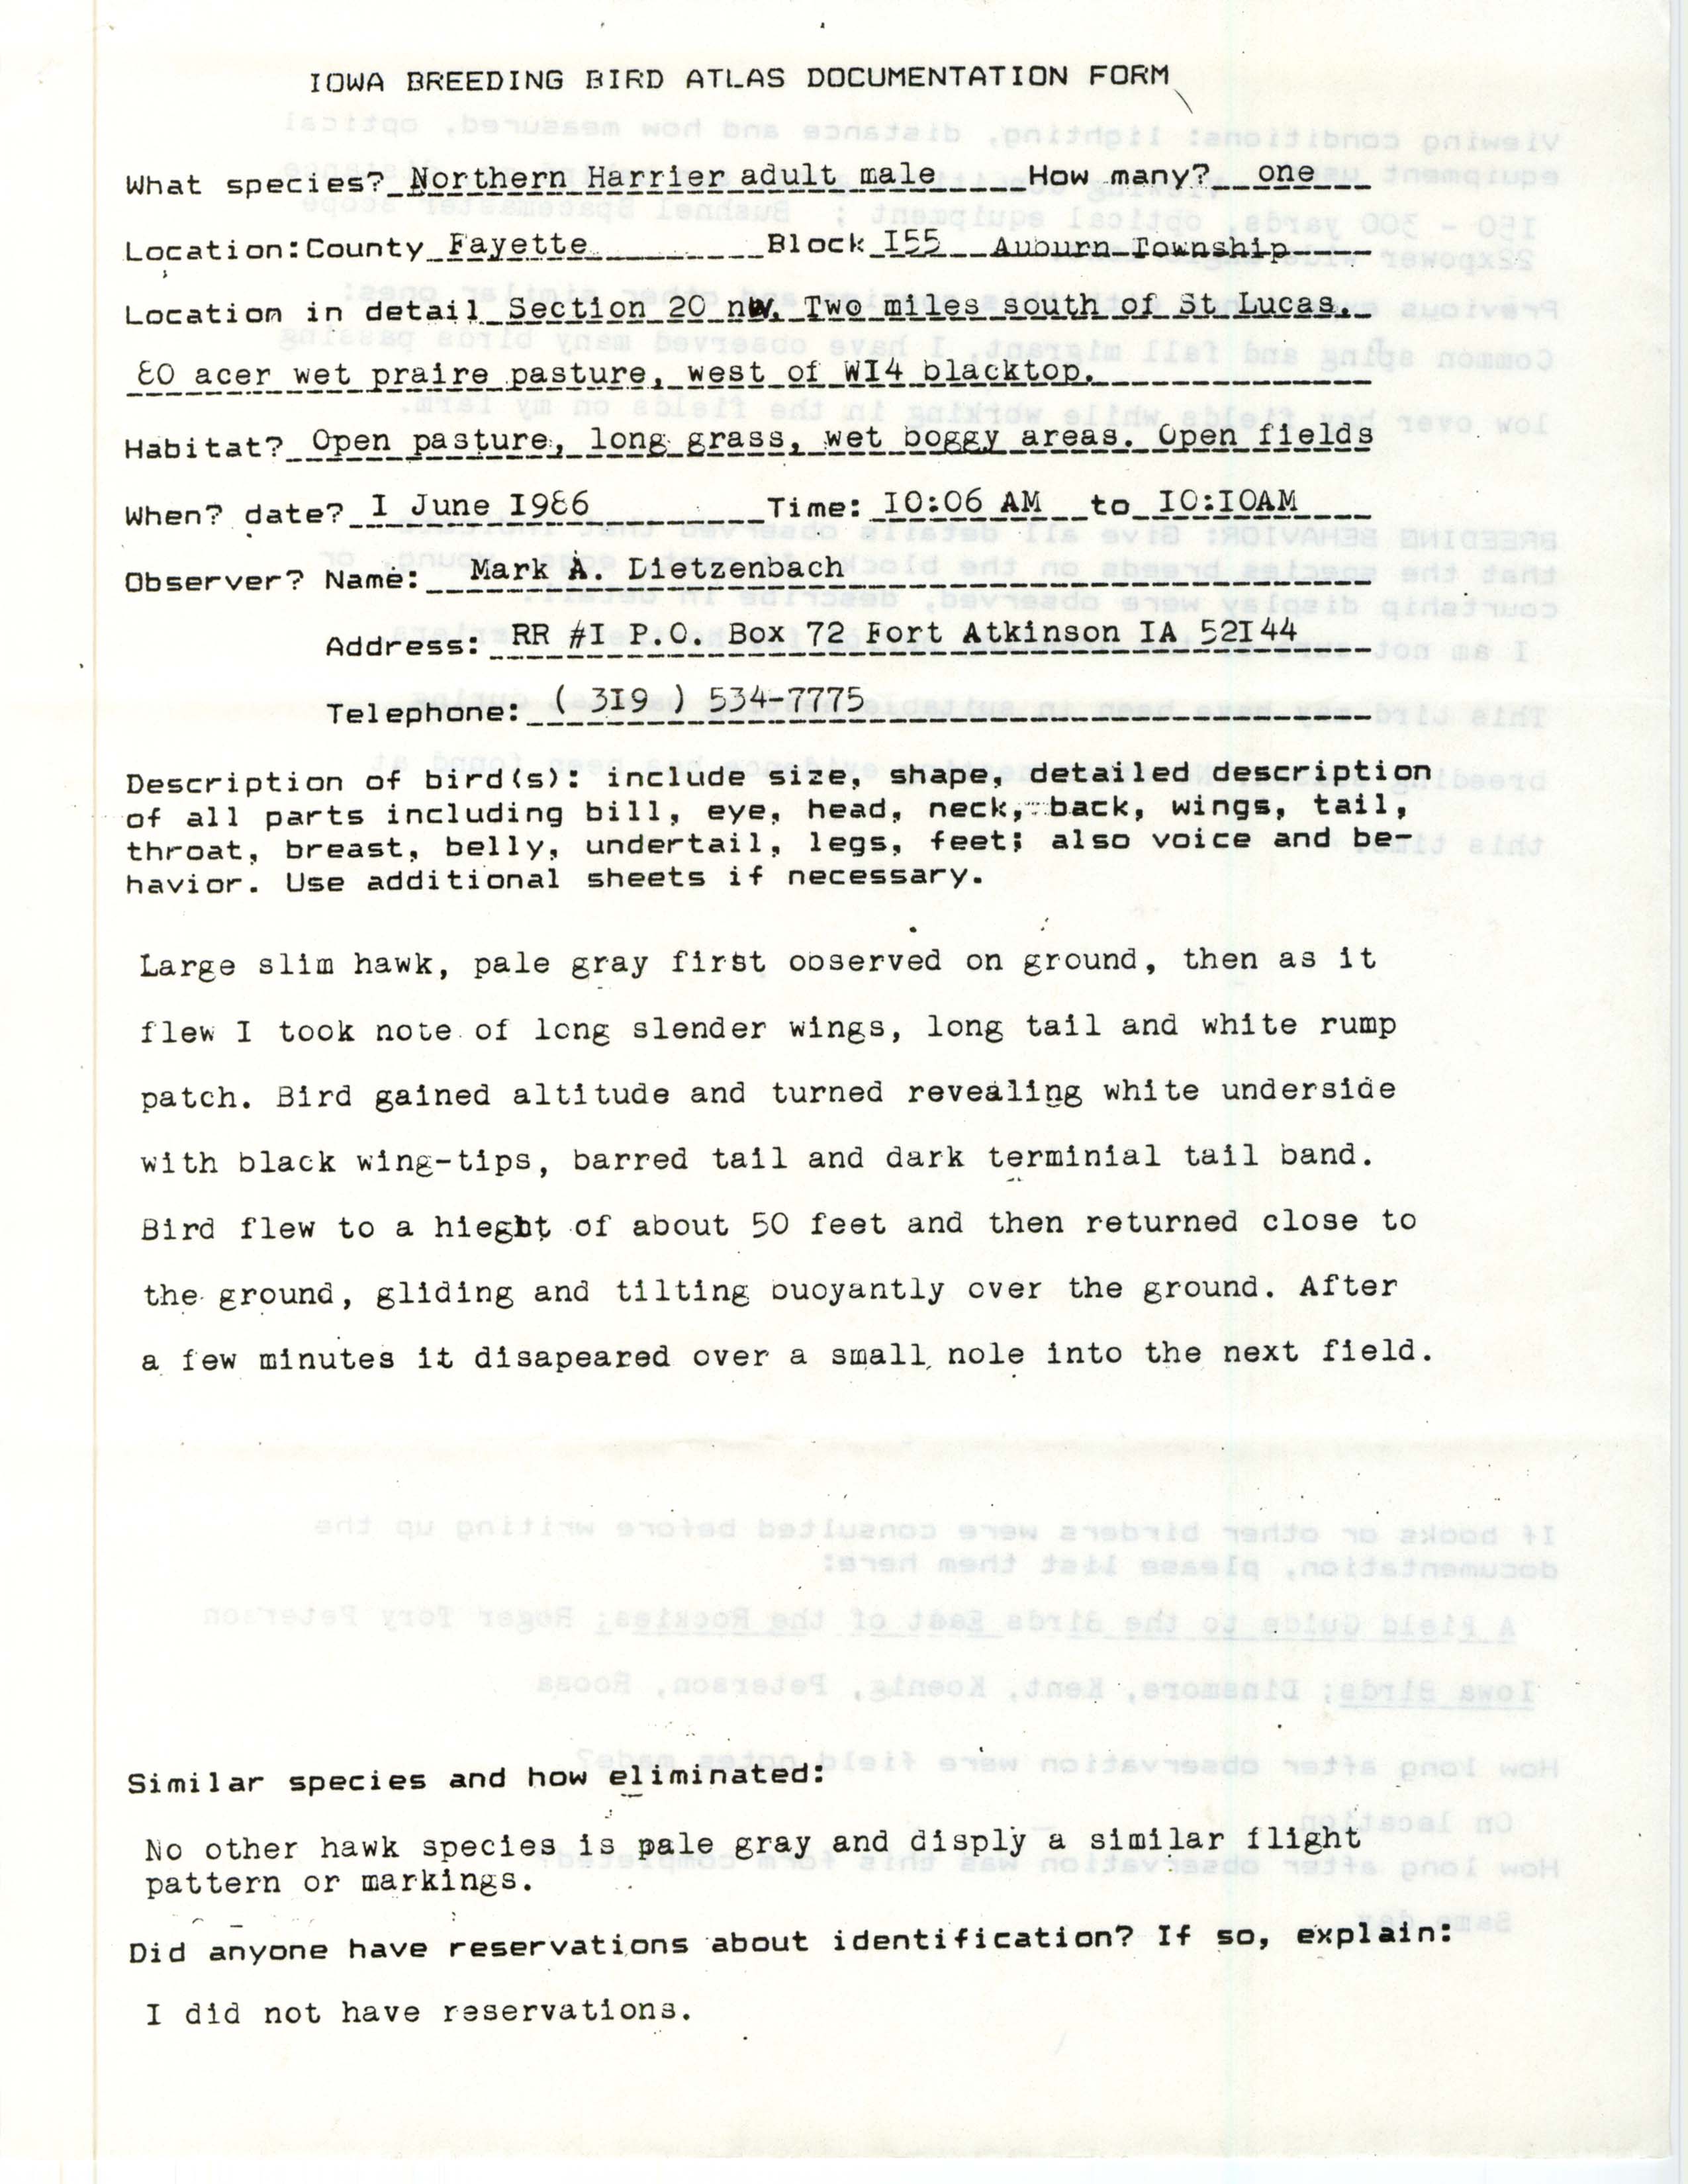 Rare bird documentation form for Northern Harrier at St. Lucas, 1986